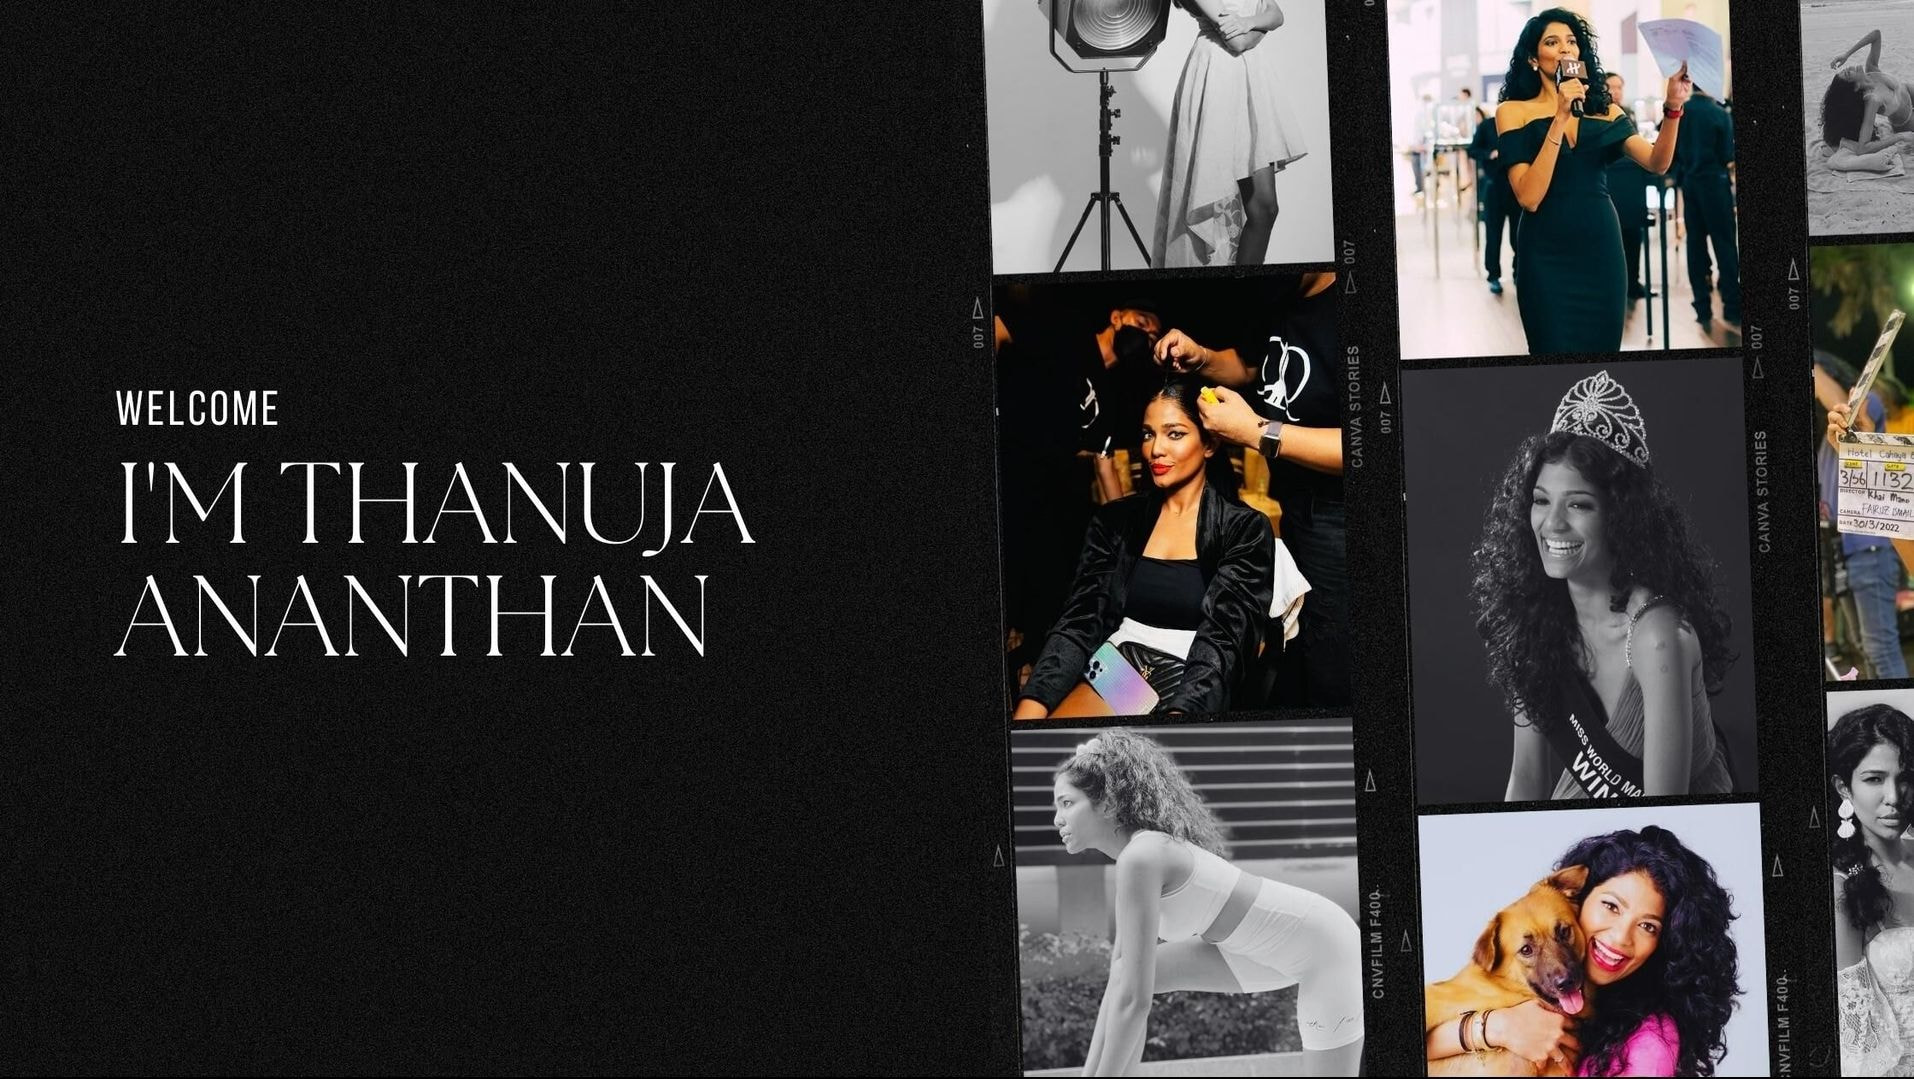 The Official Website of Thanuja Ananthan